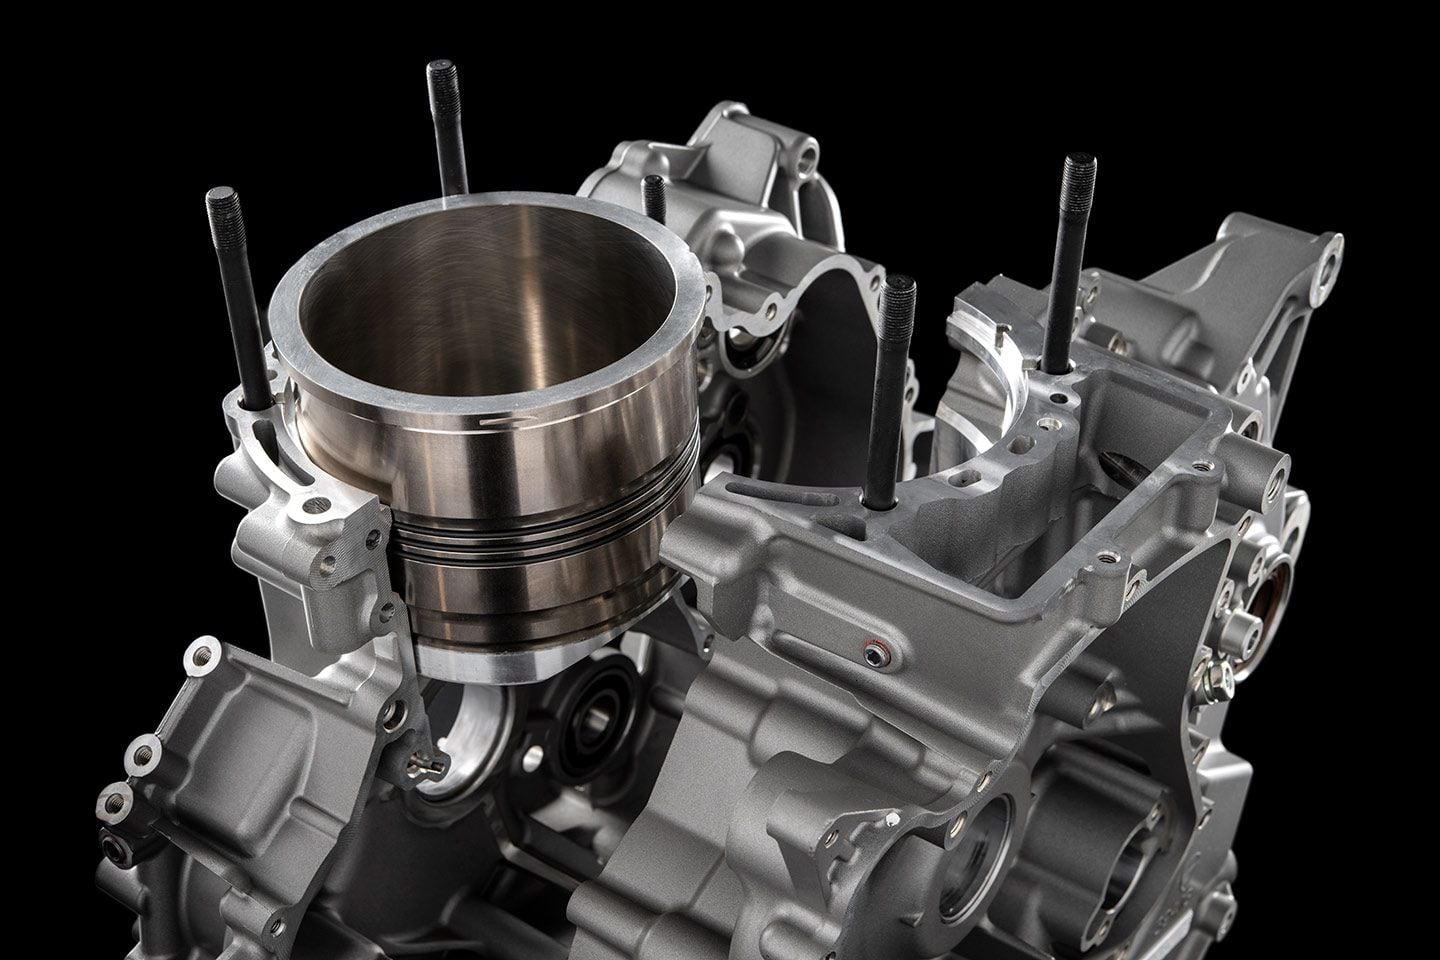 Cylinder liner is like that used in the 1299 Superleggera. Why? Weight! The standard 1299 Panigale liner was steel. The Superleggera and now Superquadro Mono is aluminum.